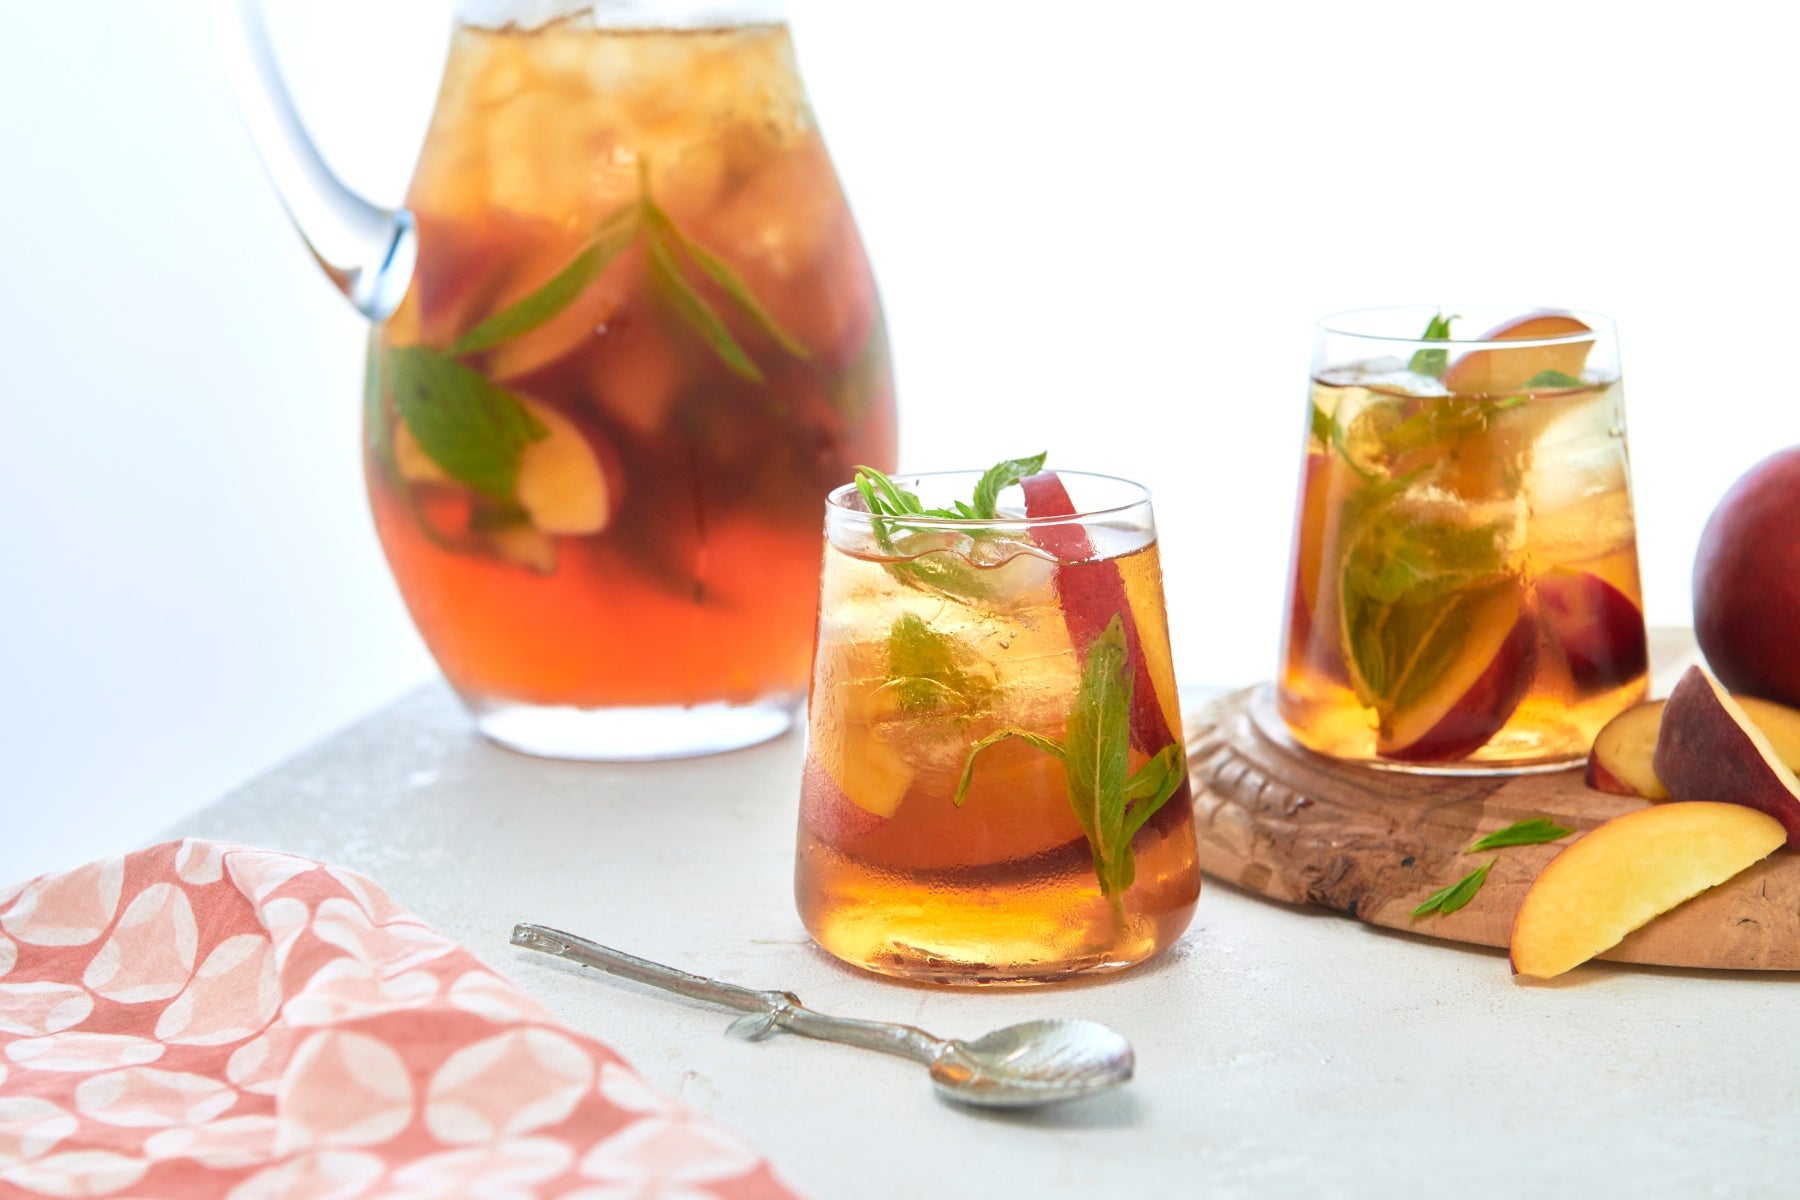 A jug and two glasses filled with homemade peachy iced tea, including slices of stone fruit and mint leaves